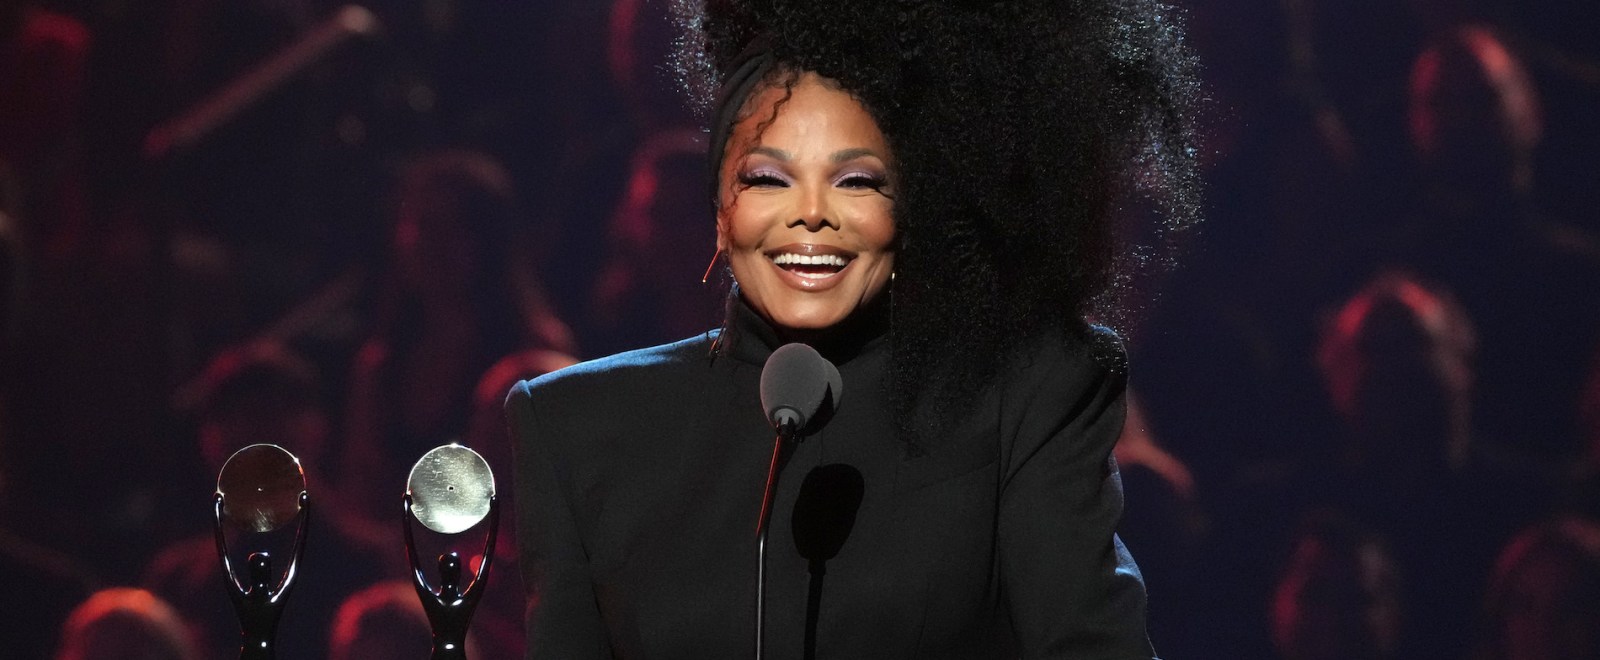 Janet Jackson 37th Annual Rock & Roll Hall of Fame Induction Ceremony 2022